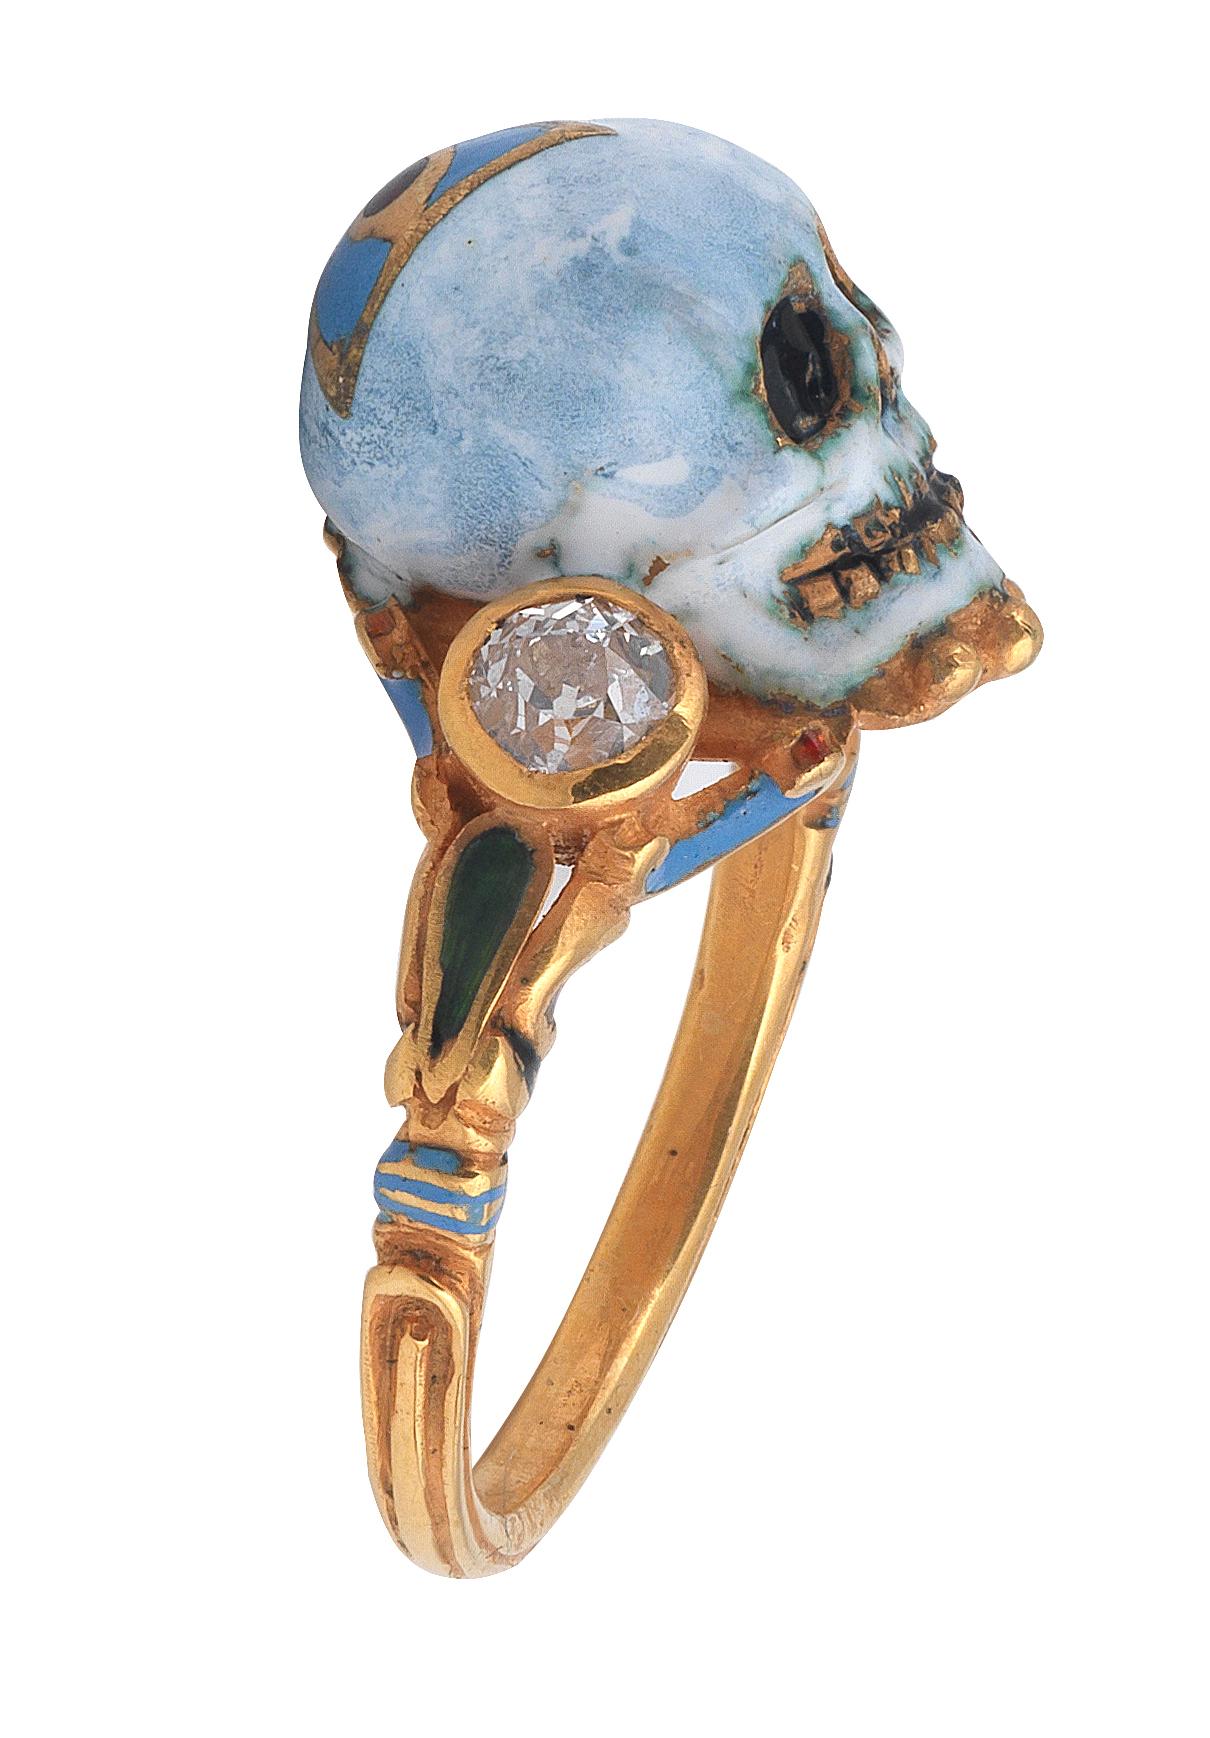 Renaissance style Memento Mori skull ring made with champleve multicolored enamels and old cut diamonds.
Mounted in 18Kt gold Signed A. Codognato Venezia Weight: 7,5 gr Finger size: 6 3/4